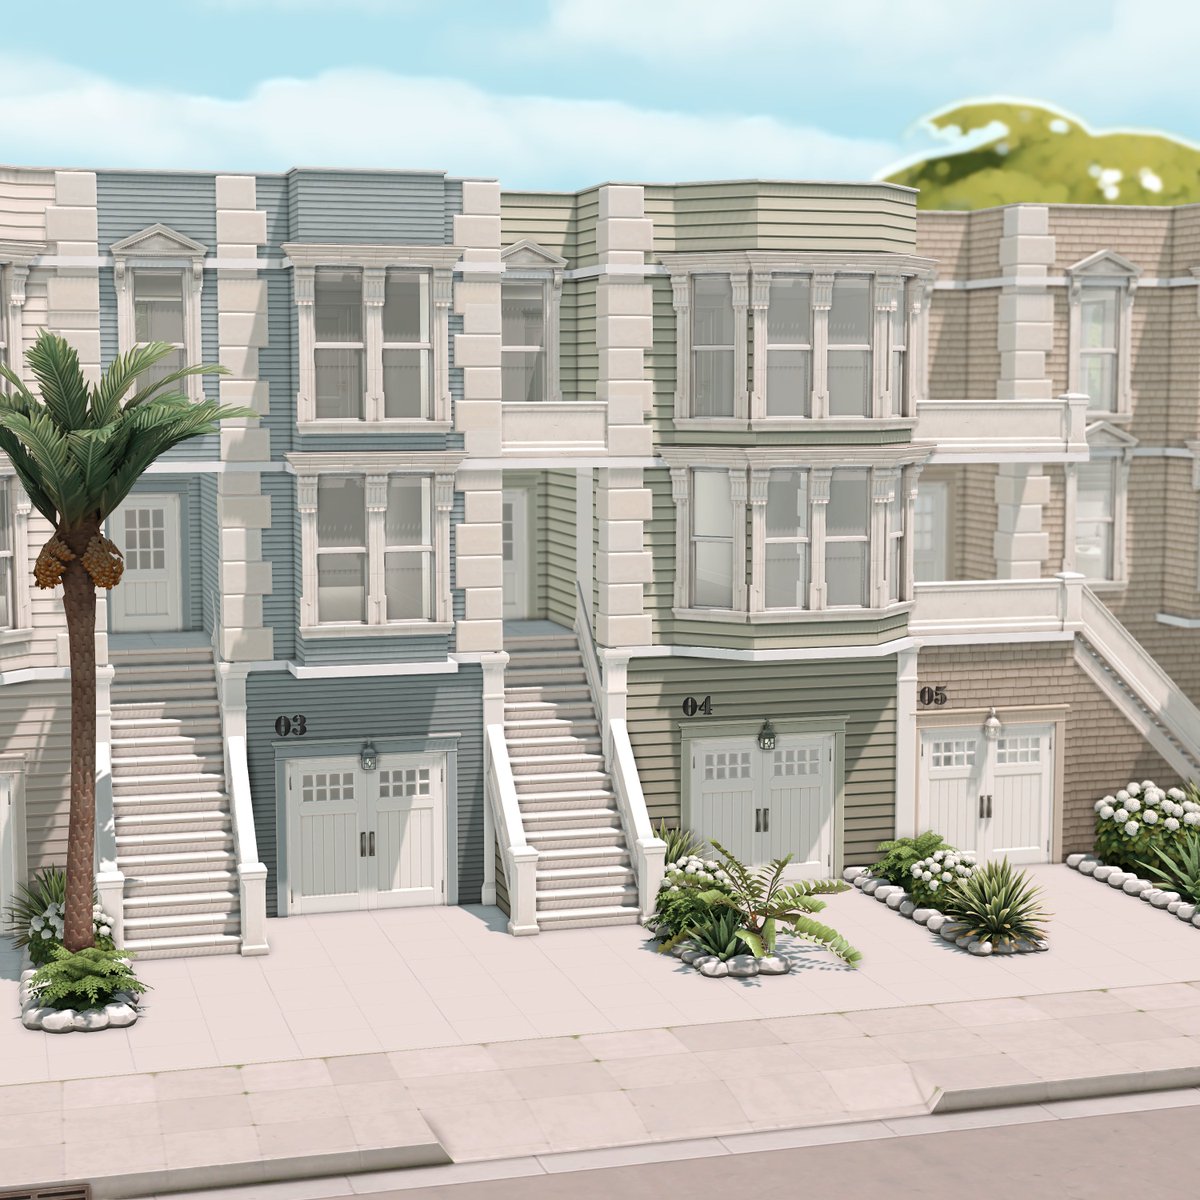 San Street Townhouses, San Sequoia🌴

Lot Download on my Patreon!
#Sims4 #Sims4ForRent #ShowUsYourBuilds